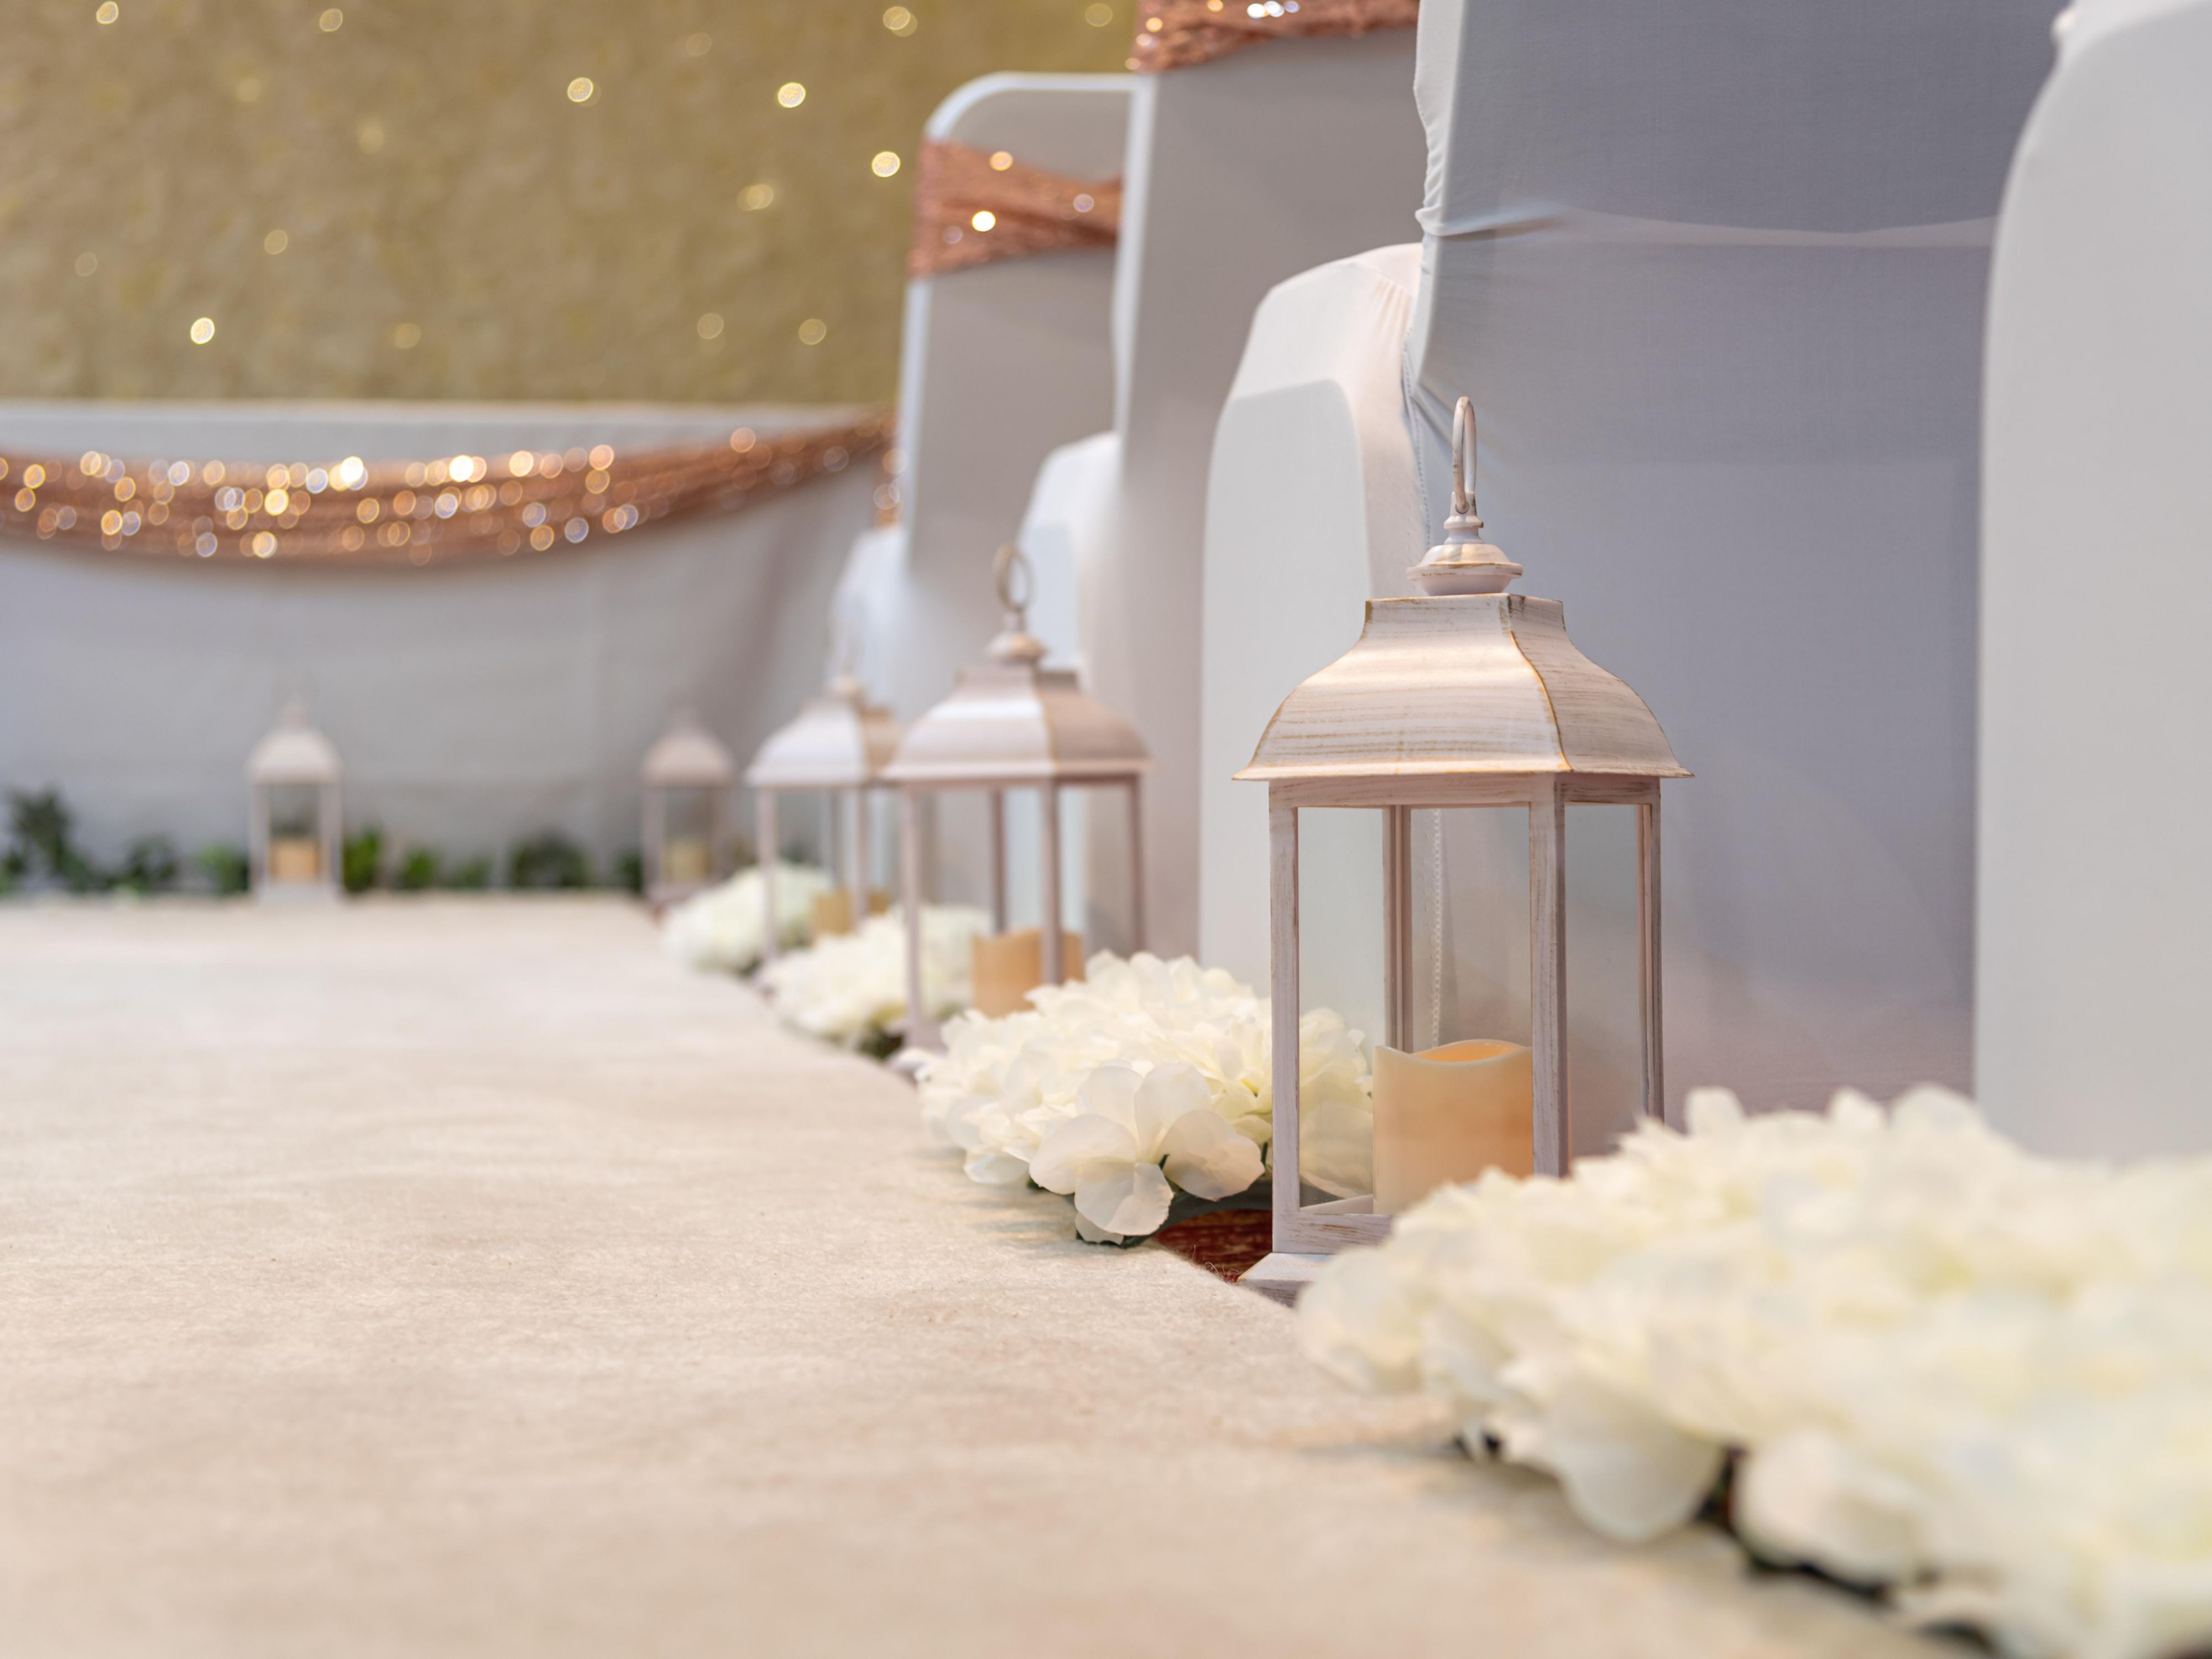 Our hotel is conveniently located for guests attending from Rotherham or Sheffield. Also, our specialist wedding coordinator will help you create your perfect day.